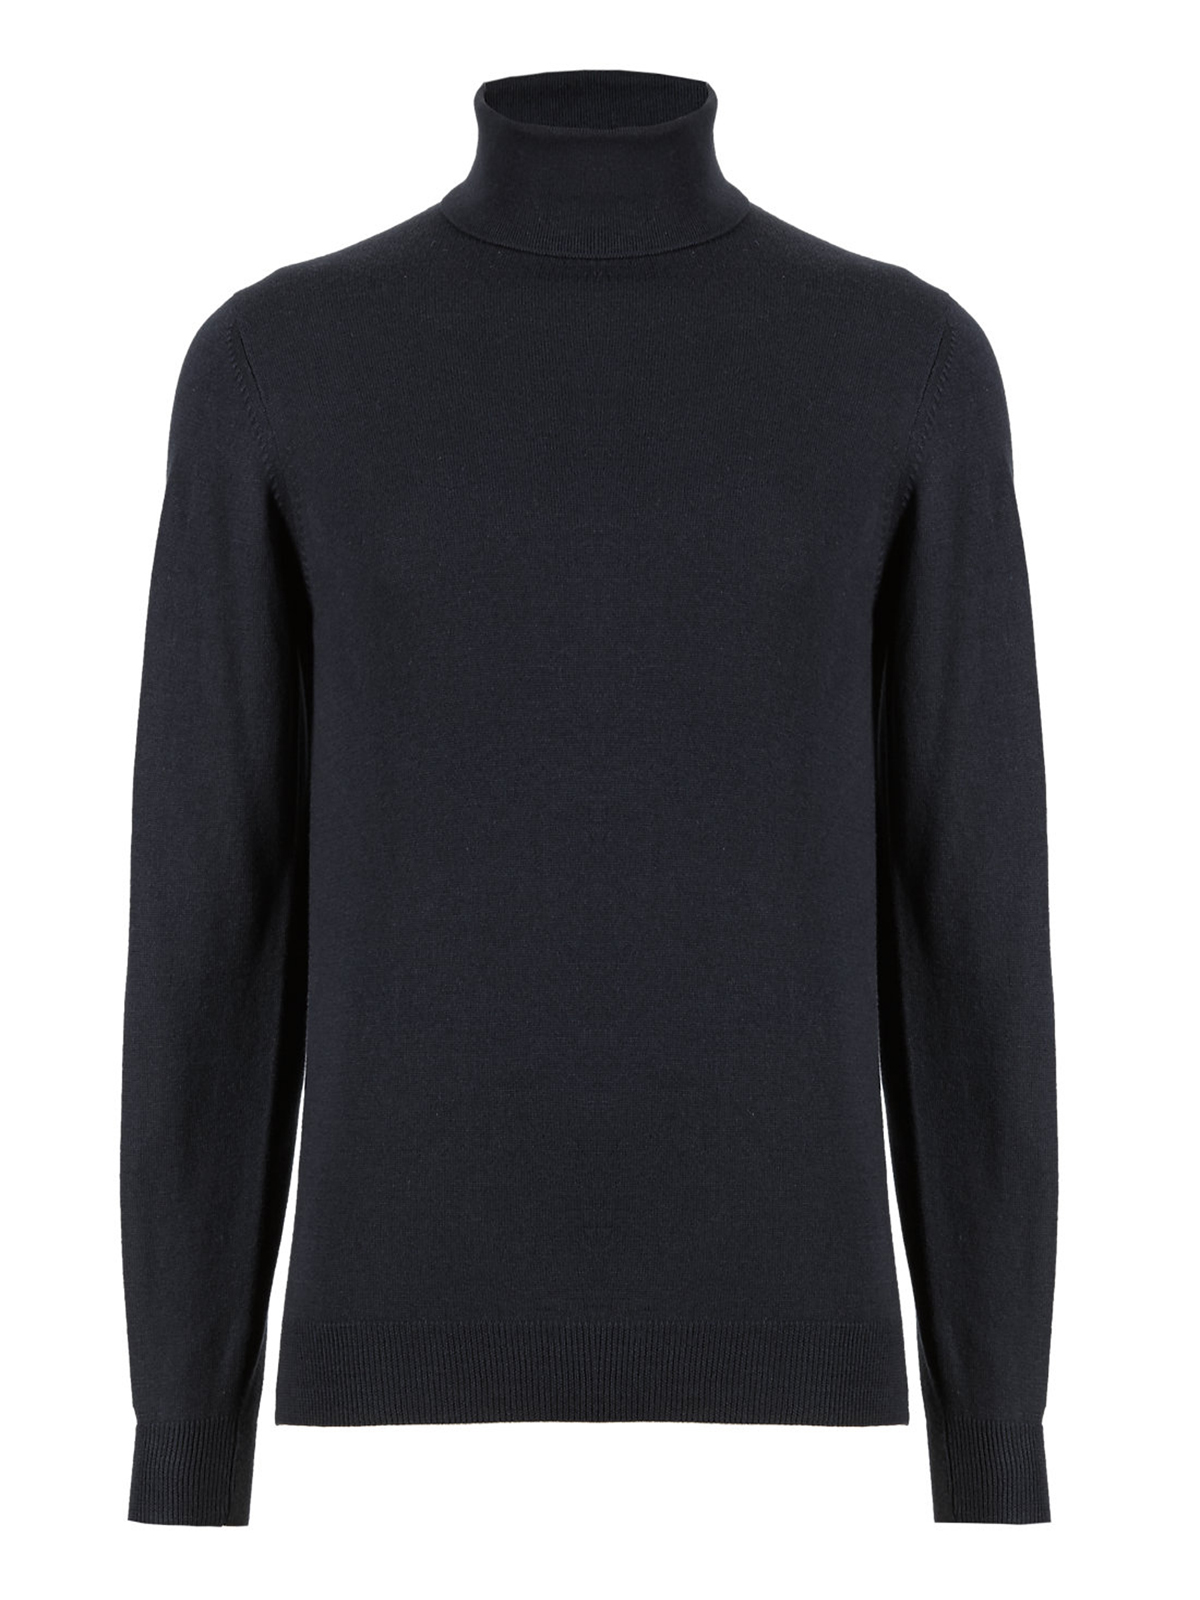 Marks and Spencer - - M&5 Mens NAVY Polo Neck Long Sleeve Cotton Blend ...